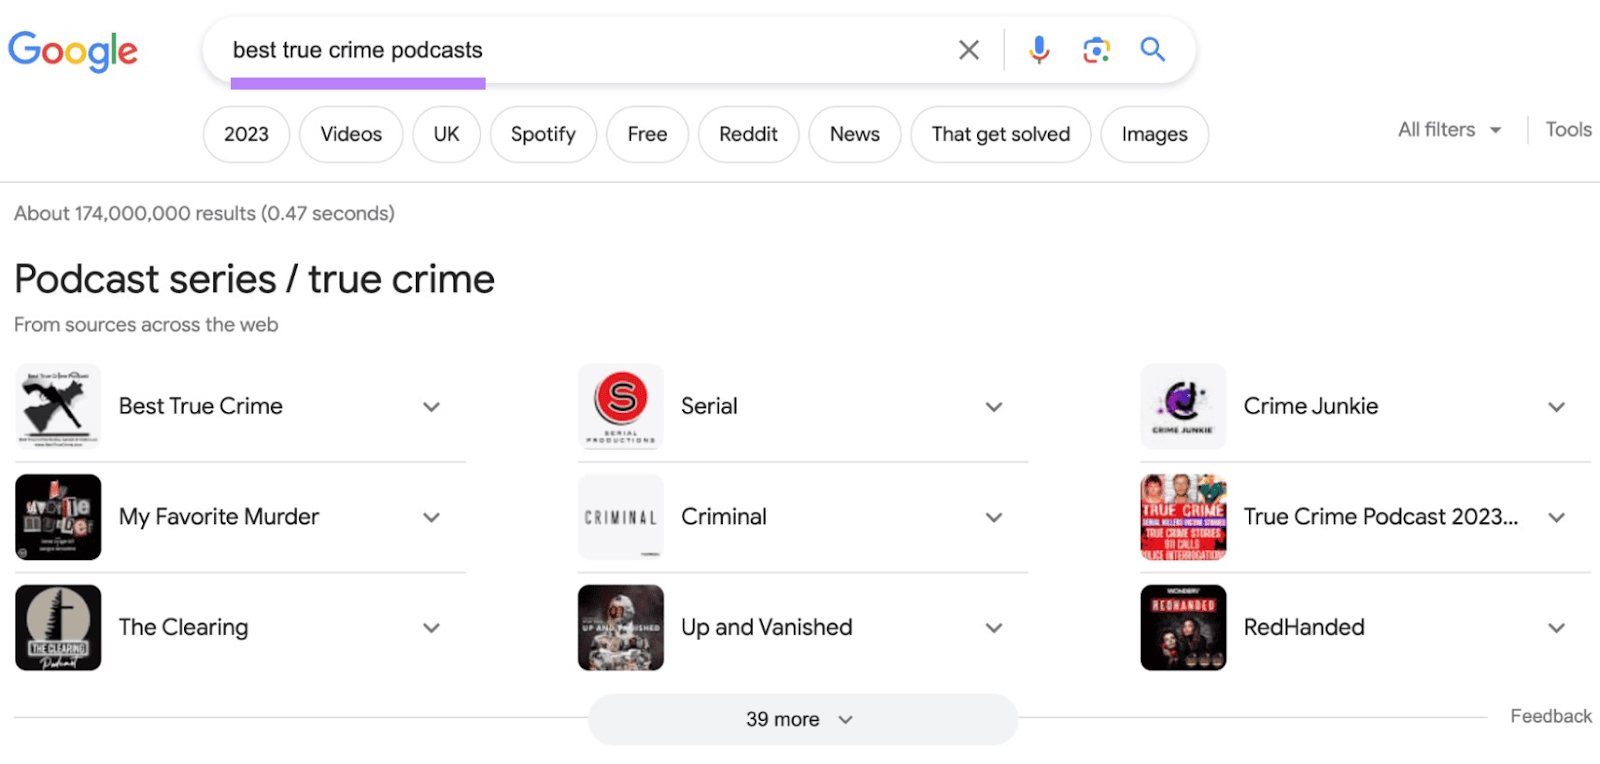 Google’s SERP for "best true crime podcasts"